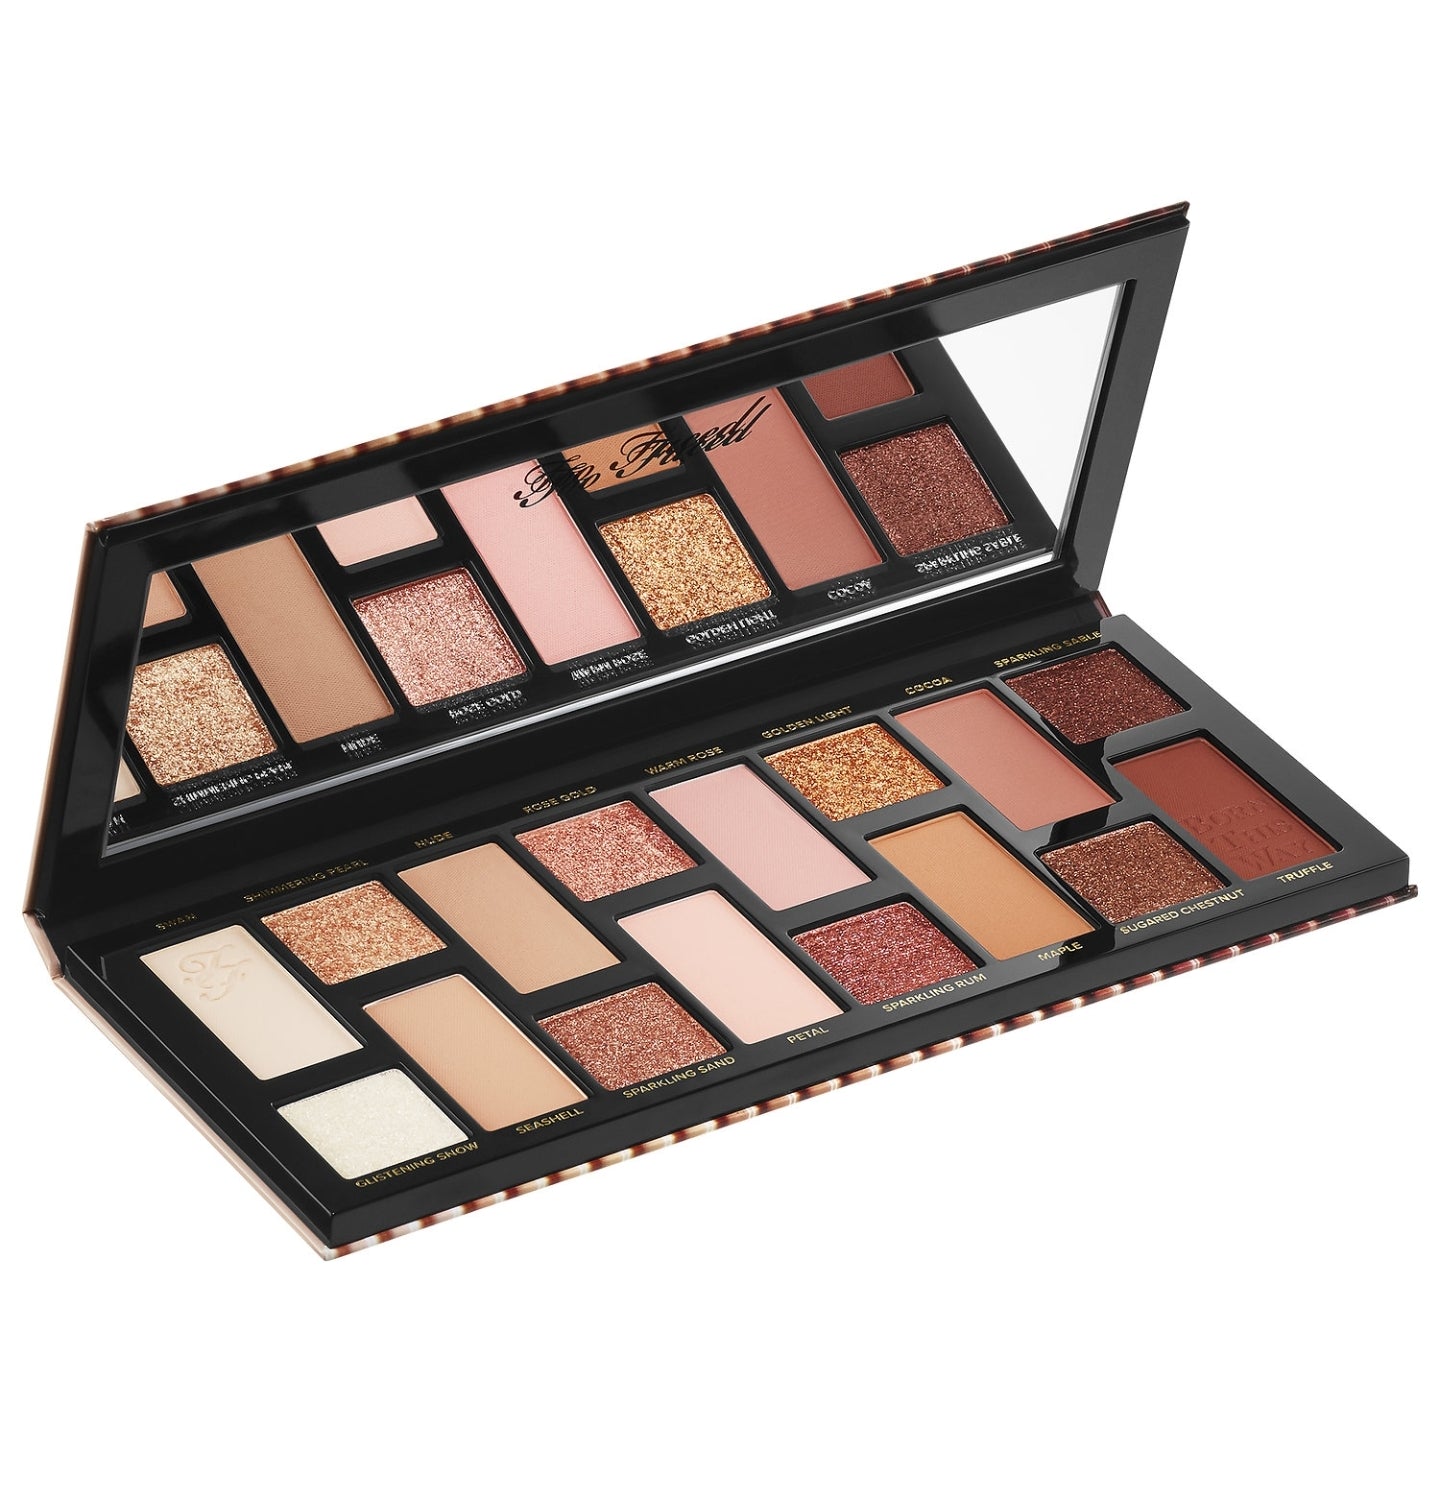 The natural nudes - born this way eyeshadow palette